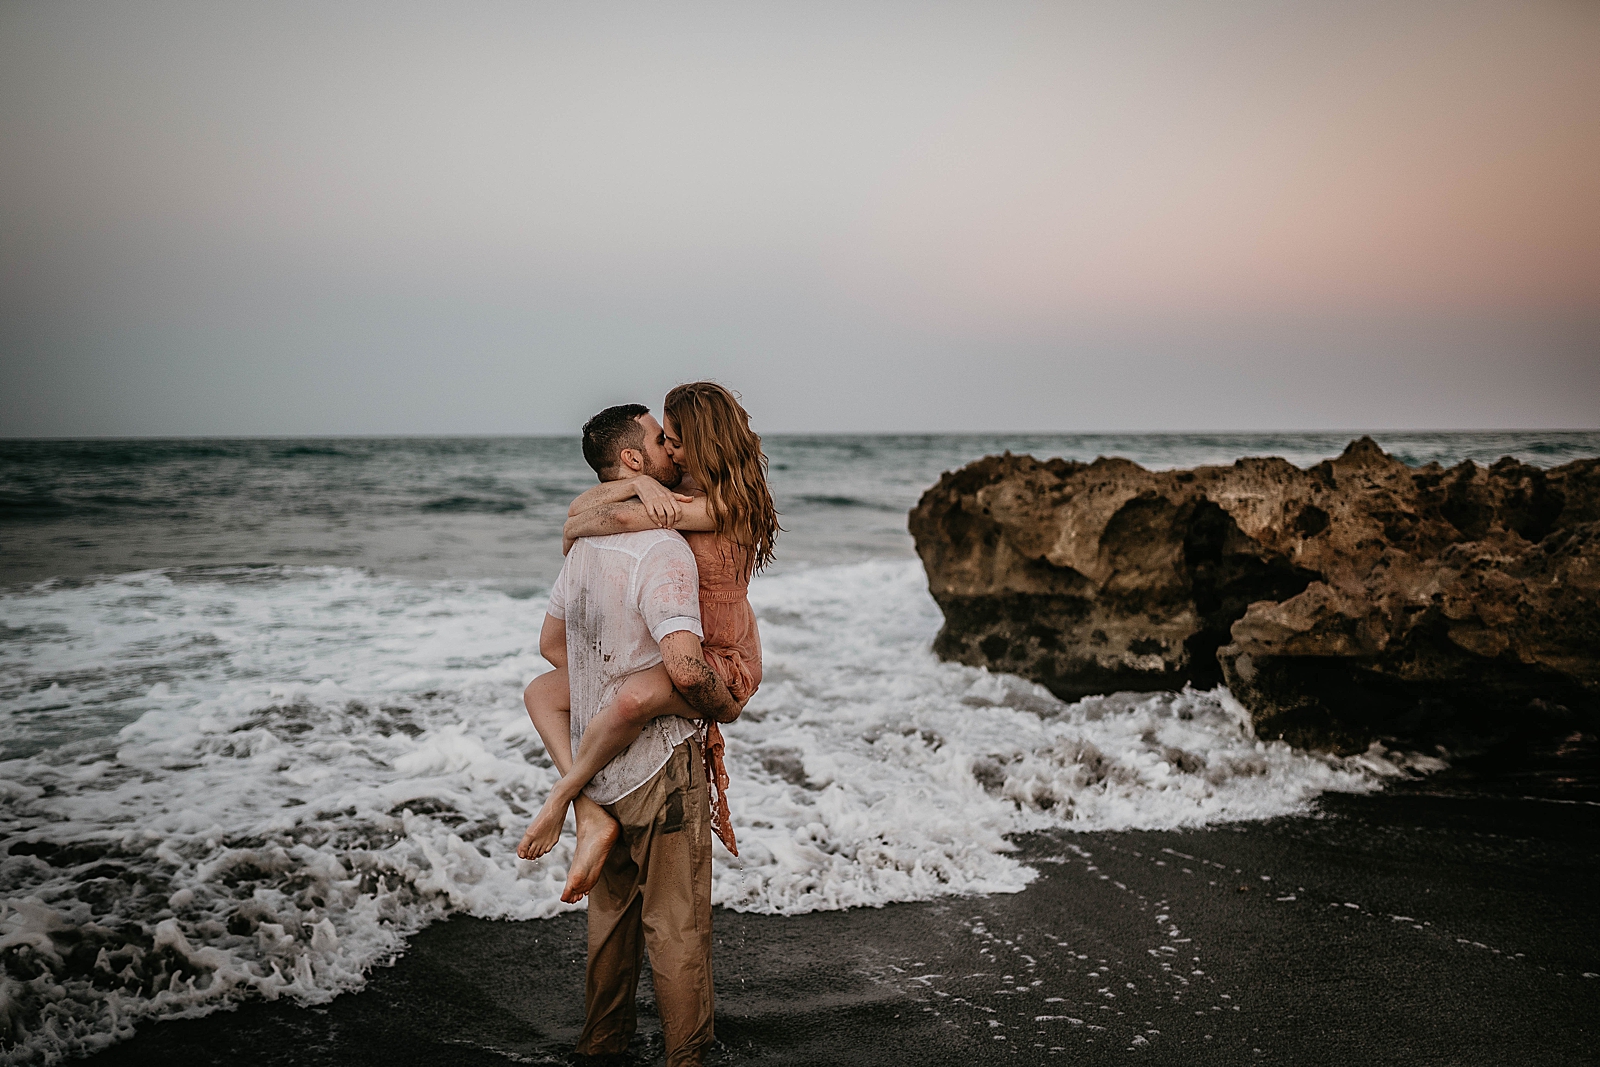 Man holding lady and kissing with waves crashing into them